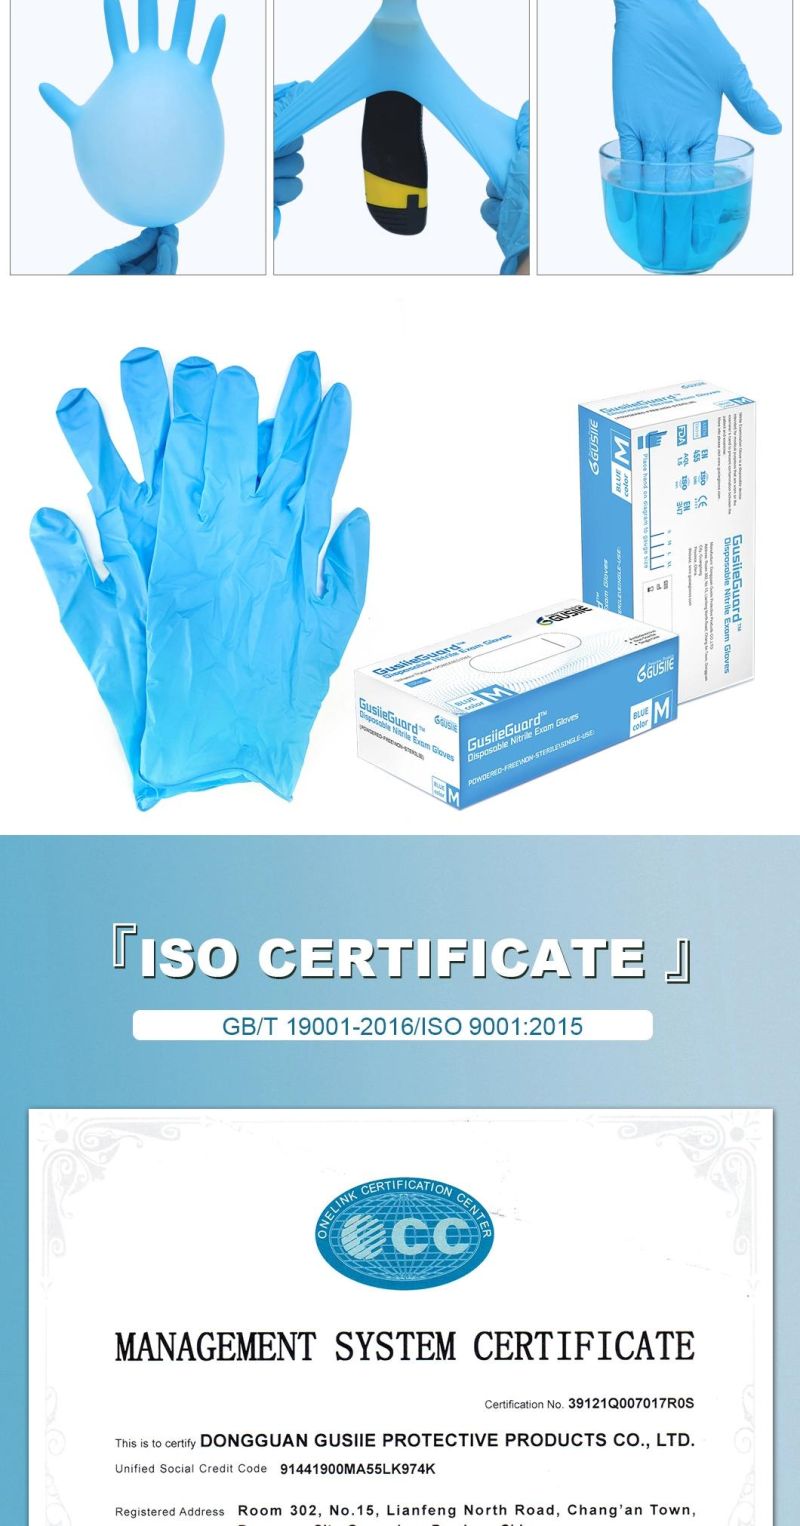 Nitrile Glove Glove Glove Production Line Powdered Free Disposable Medical Examination Gloves